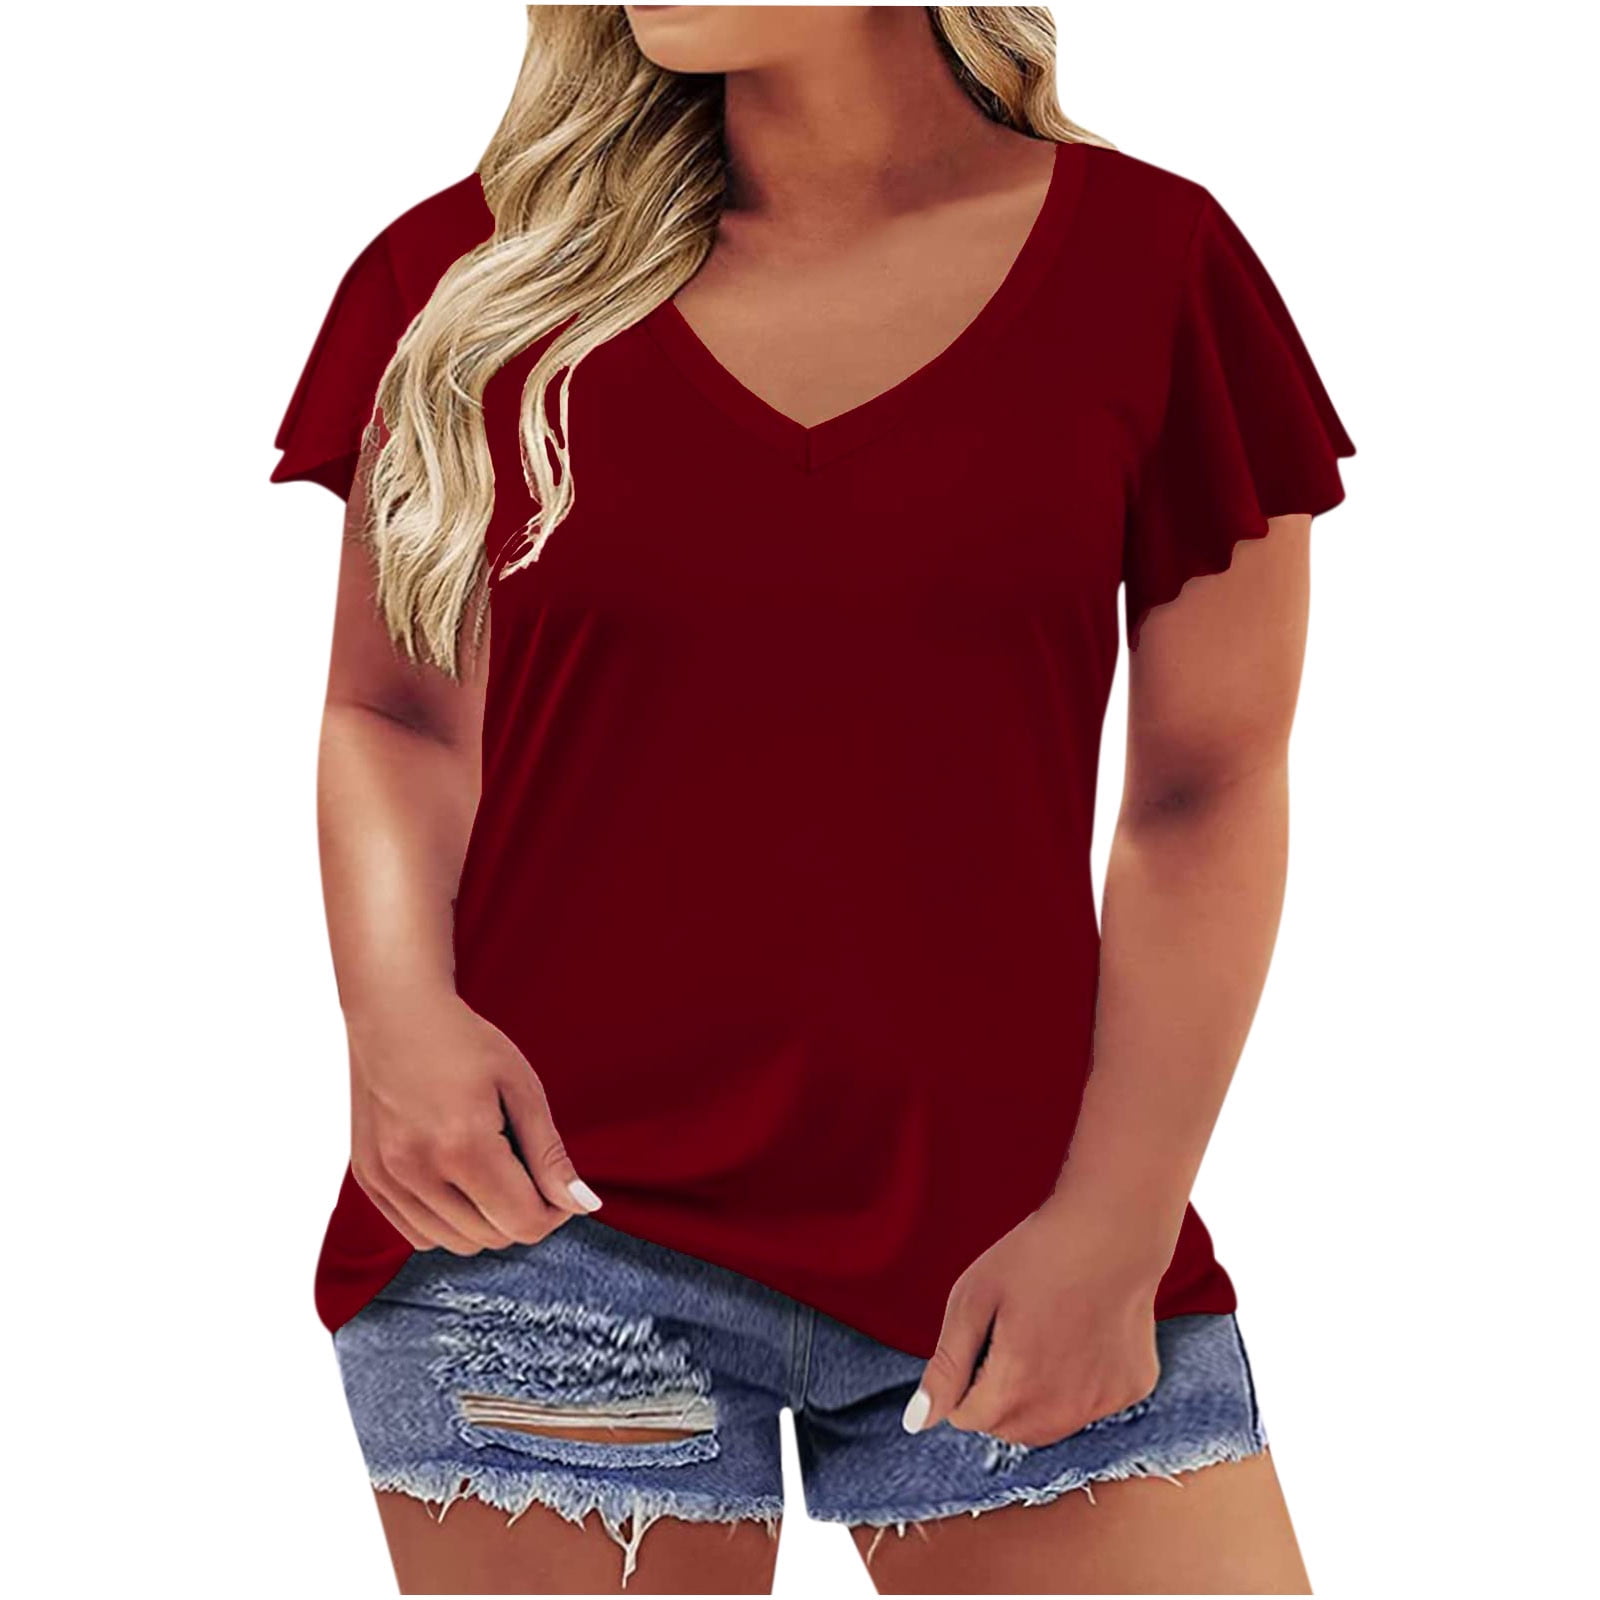 Women Summer T-shirt Solid Color Short Sleeves Round Neck Slim Fit Pullover  Match Pants Soft Casual Anti-pilling Women Top Women Clothes,Brick Red XL 